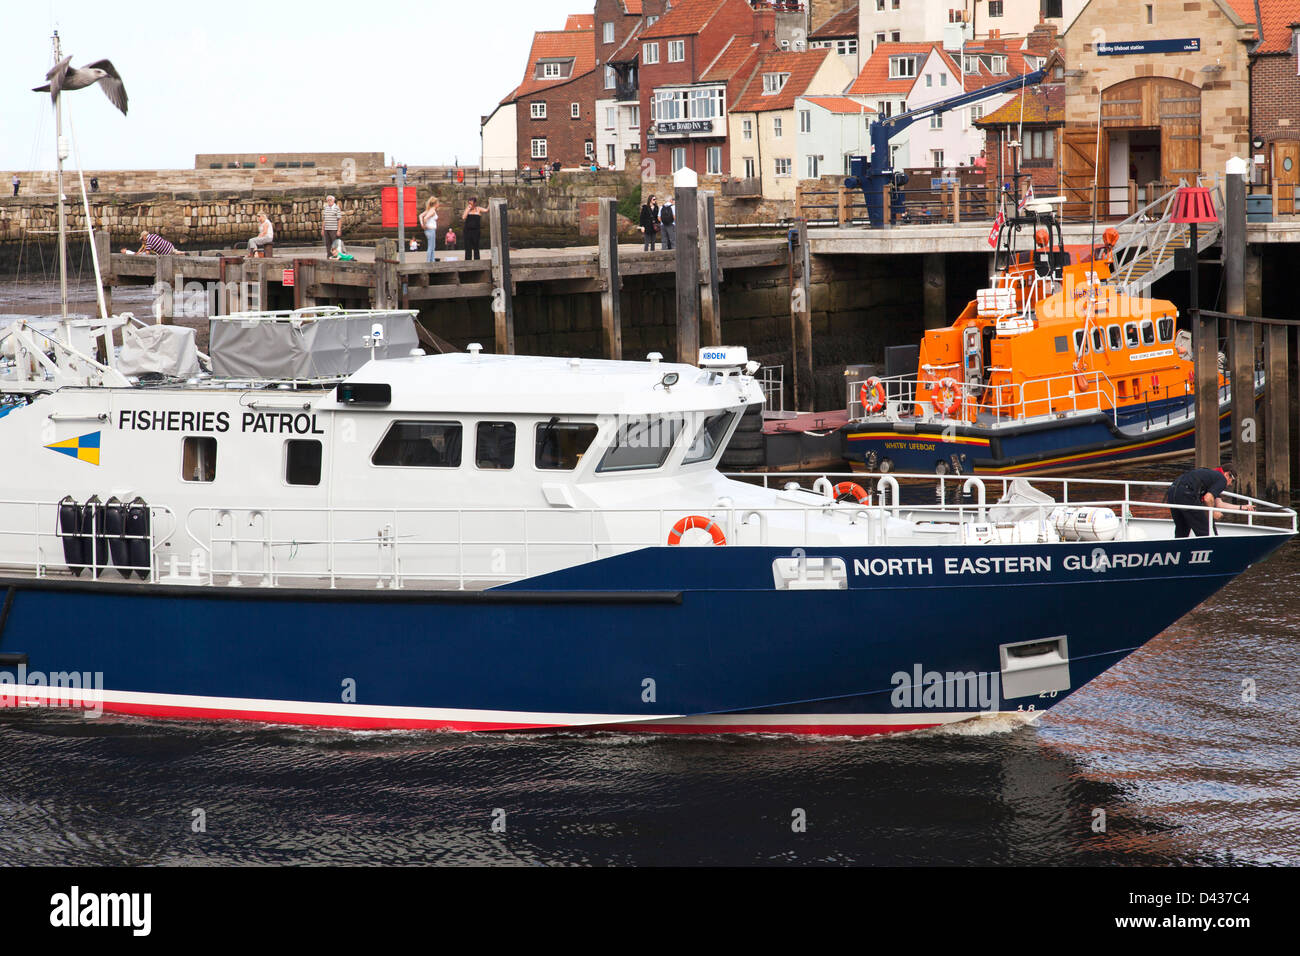 The North Eastern Guardian III Fisheries Protection Patrol vessel in Whitby Harbour, North Yorkshire, England, UK. Stock Photo